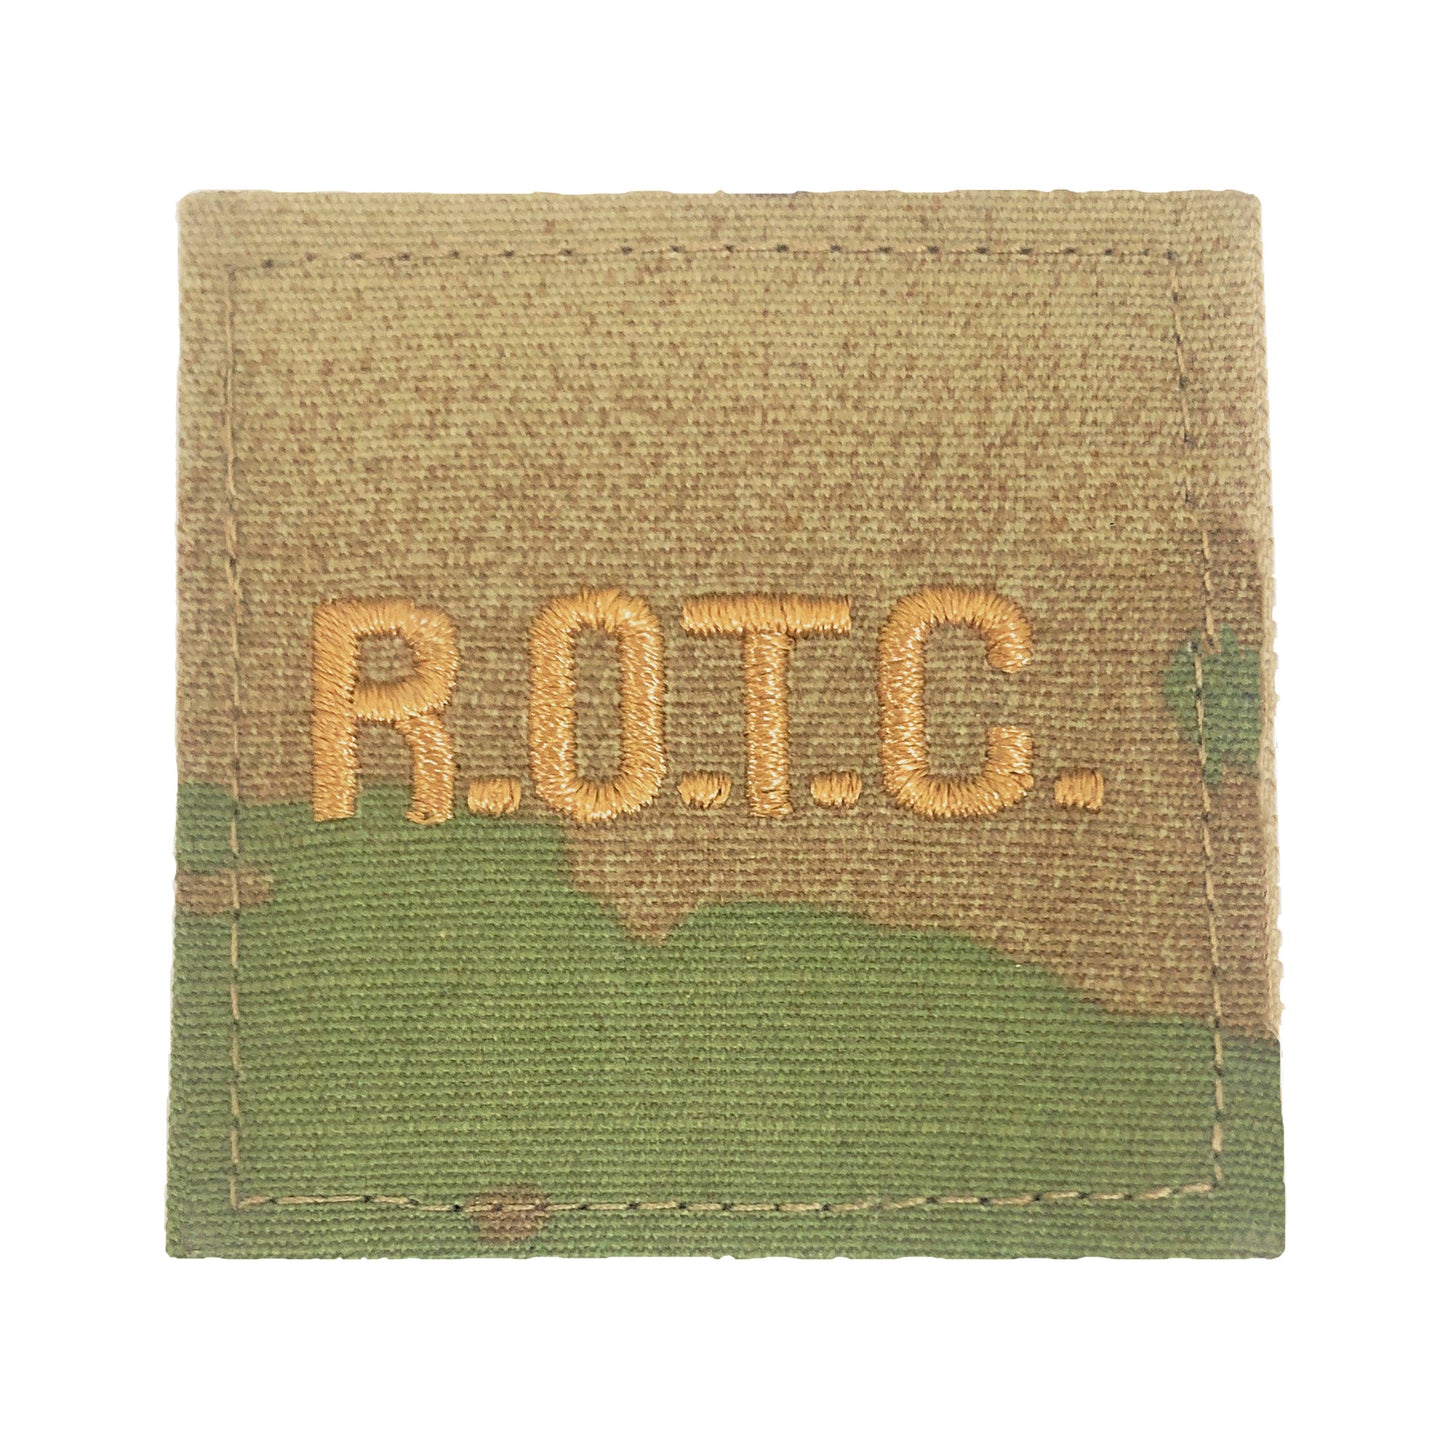 R.O.T.C. Gold Letters OCP Rank with Hook Fastener